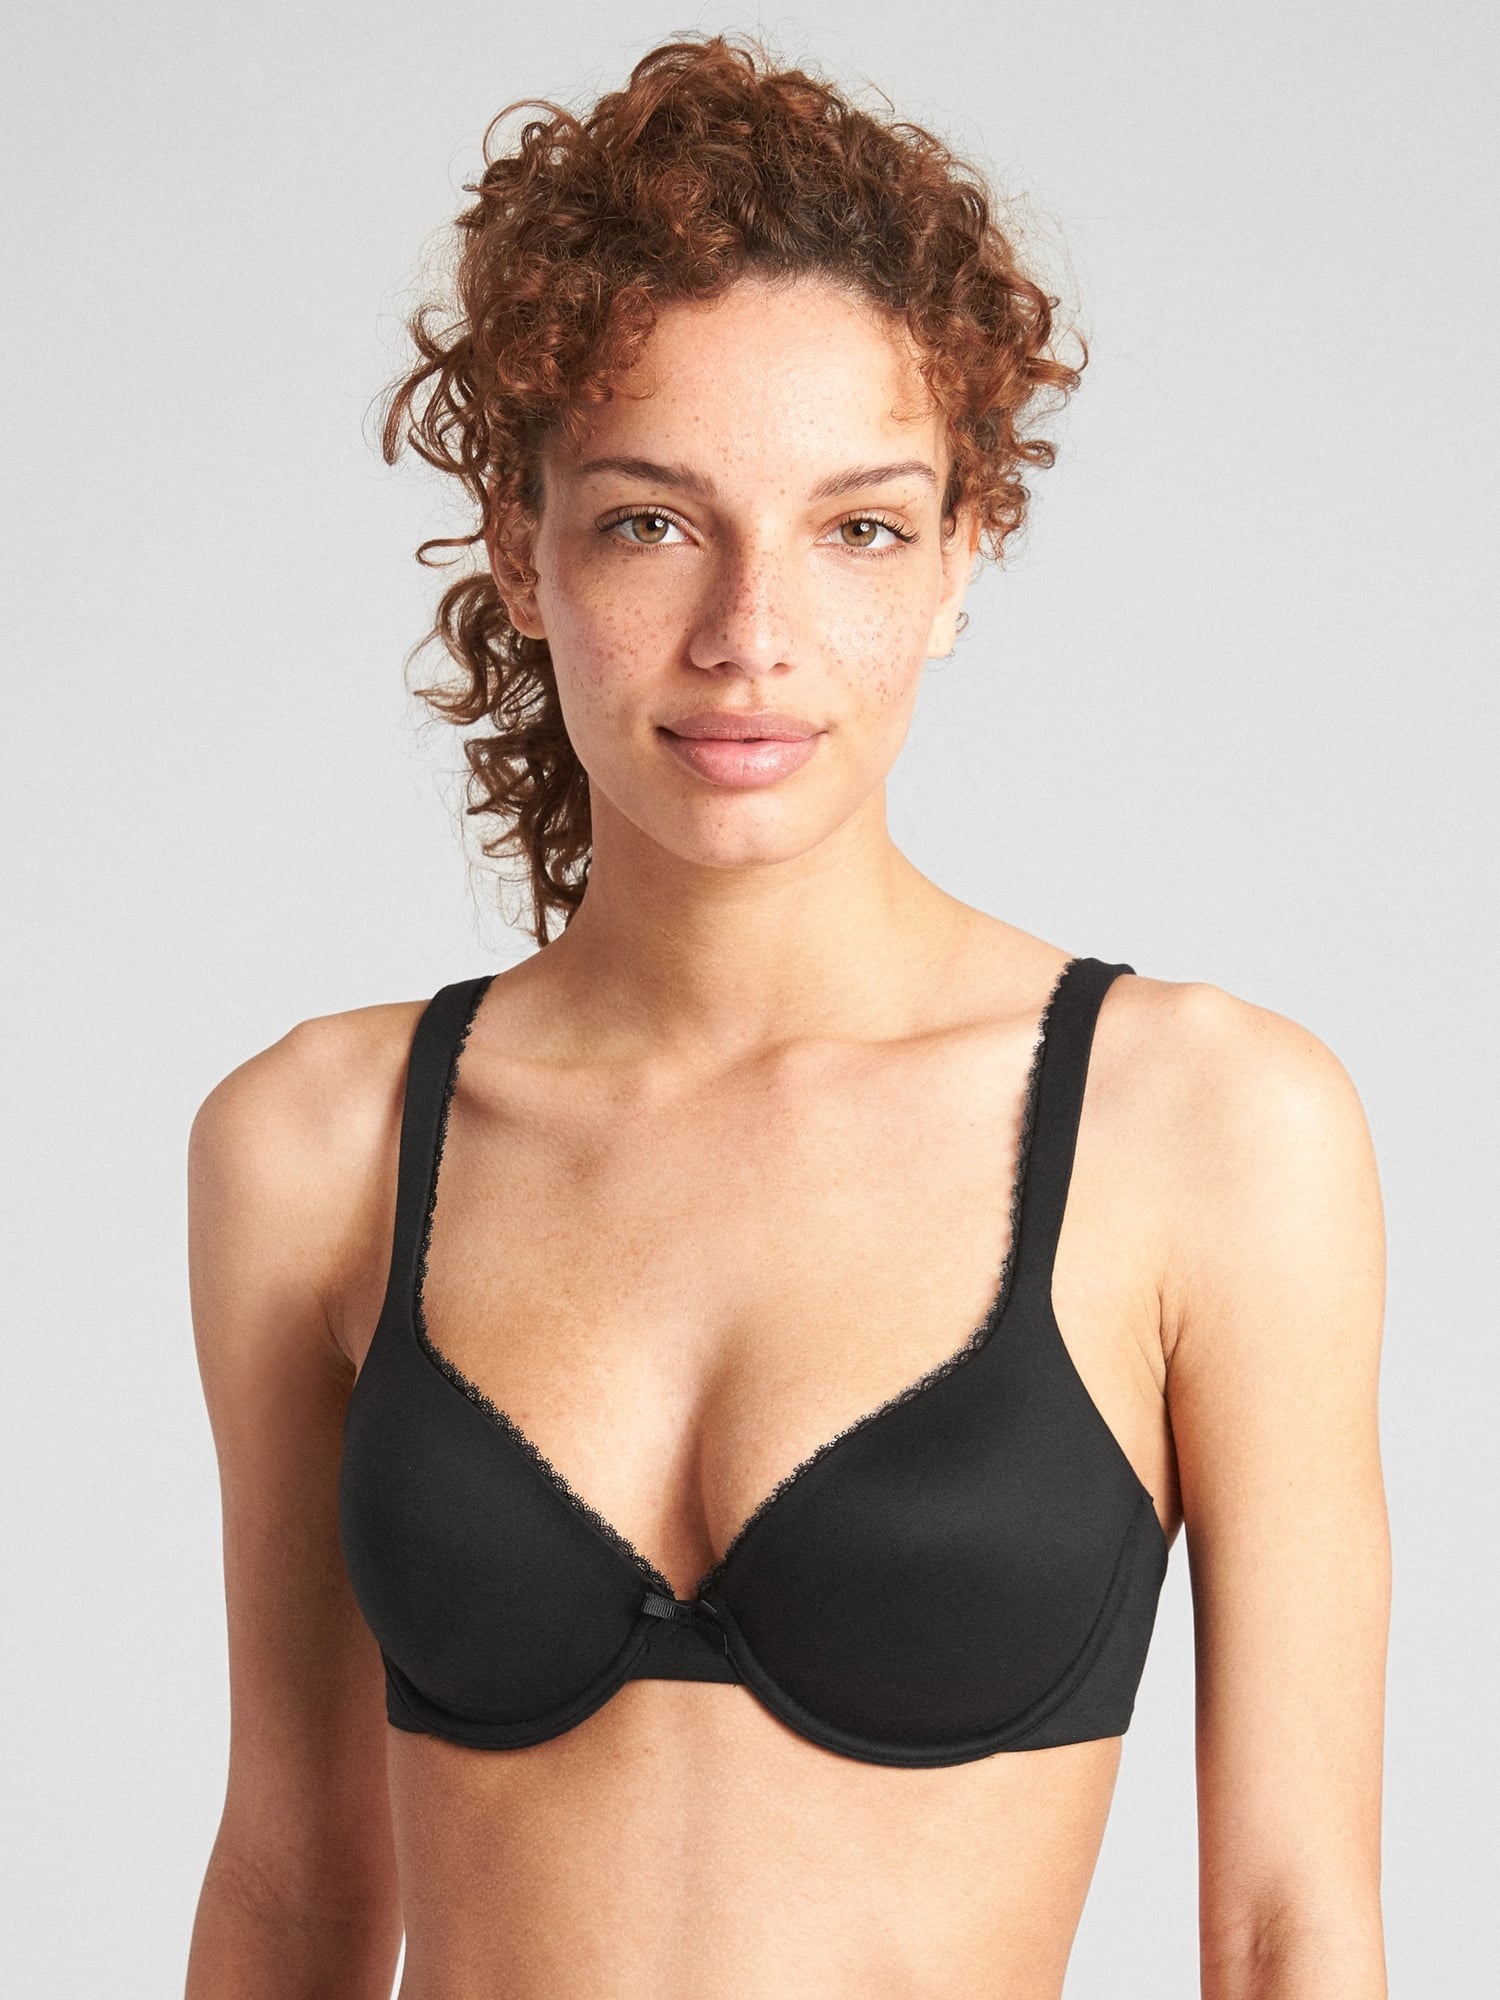 Bare Natural Double-Knit Plunge Bra